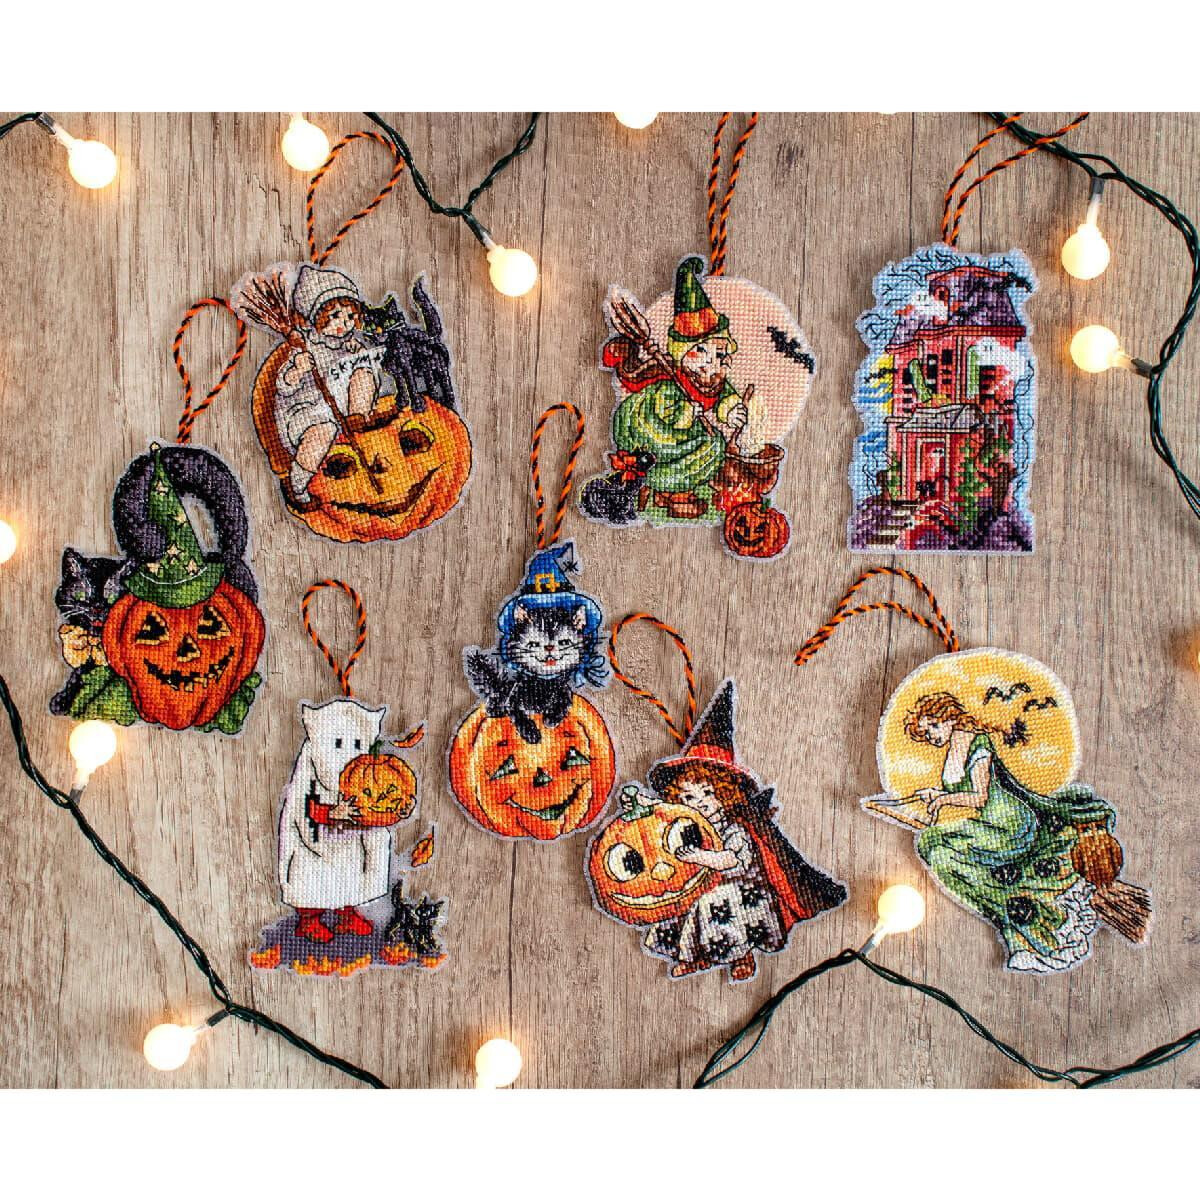 The Halloween ornaments in the Letistitch embroidery pack...